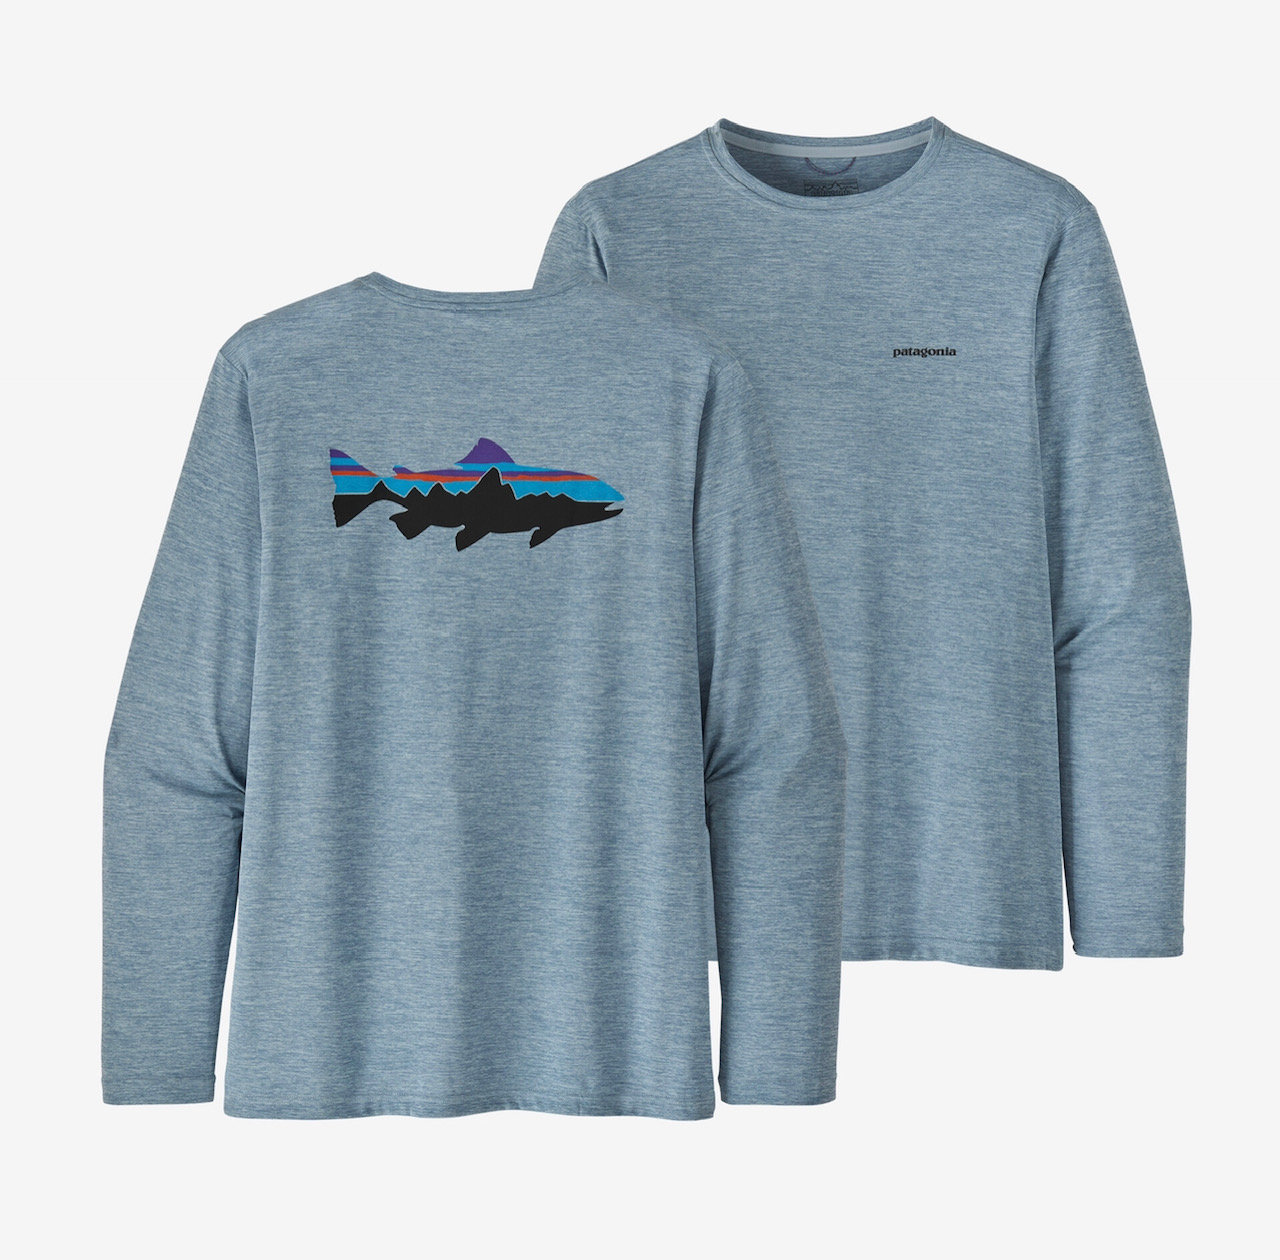 Patagonia M's L/S Capilene Cool Daily Fish Graphic Shirt - Fitz Roy Trout: Steam Blue X-Dye - XL